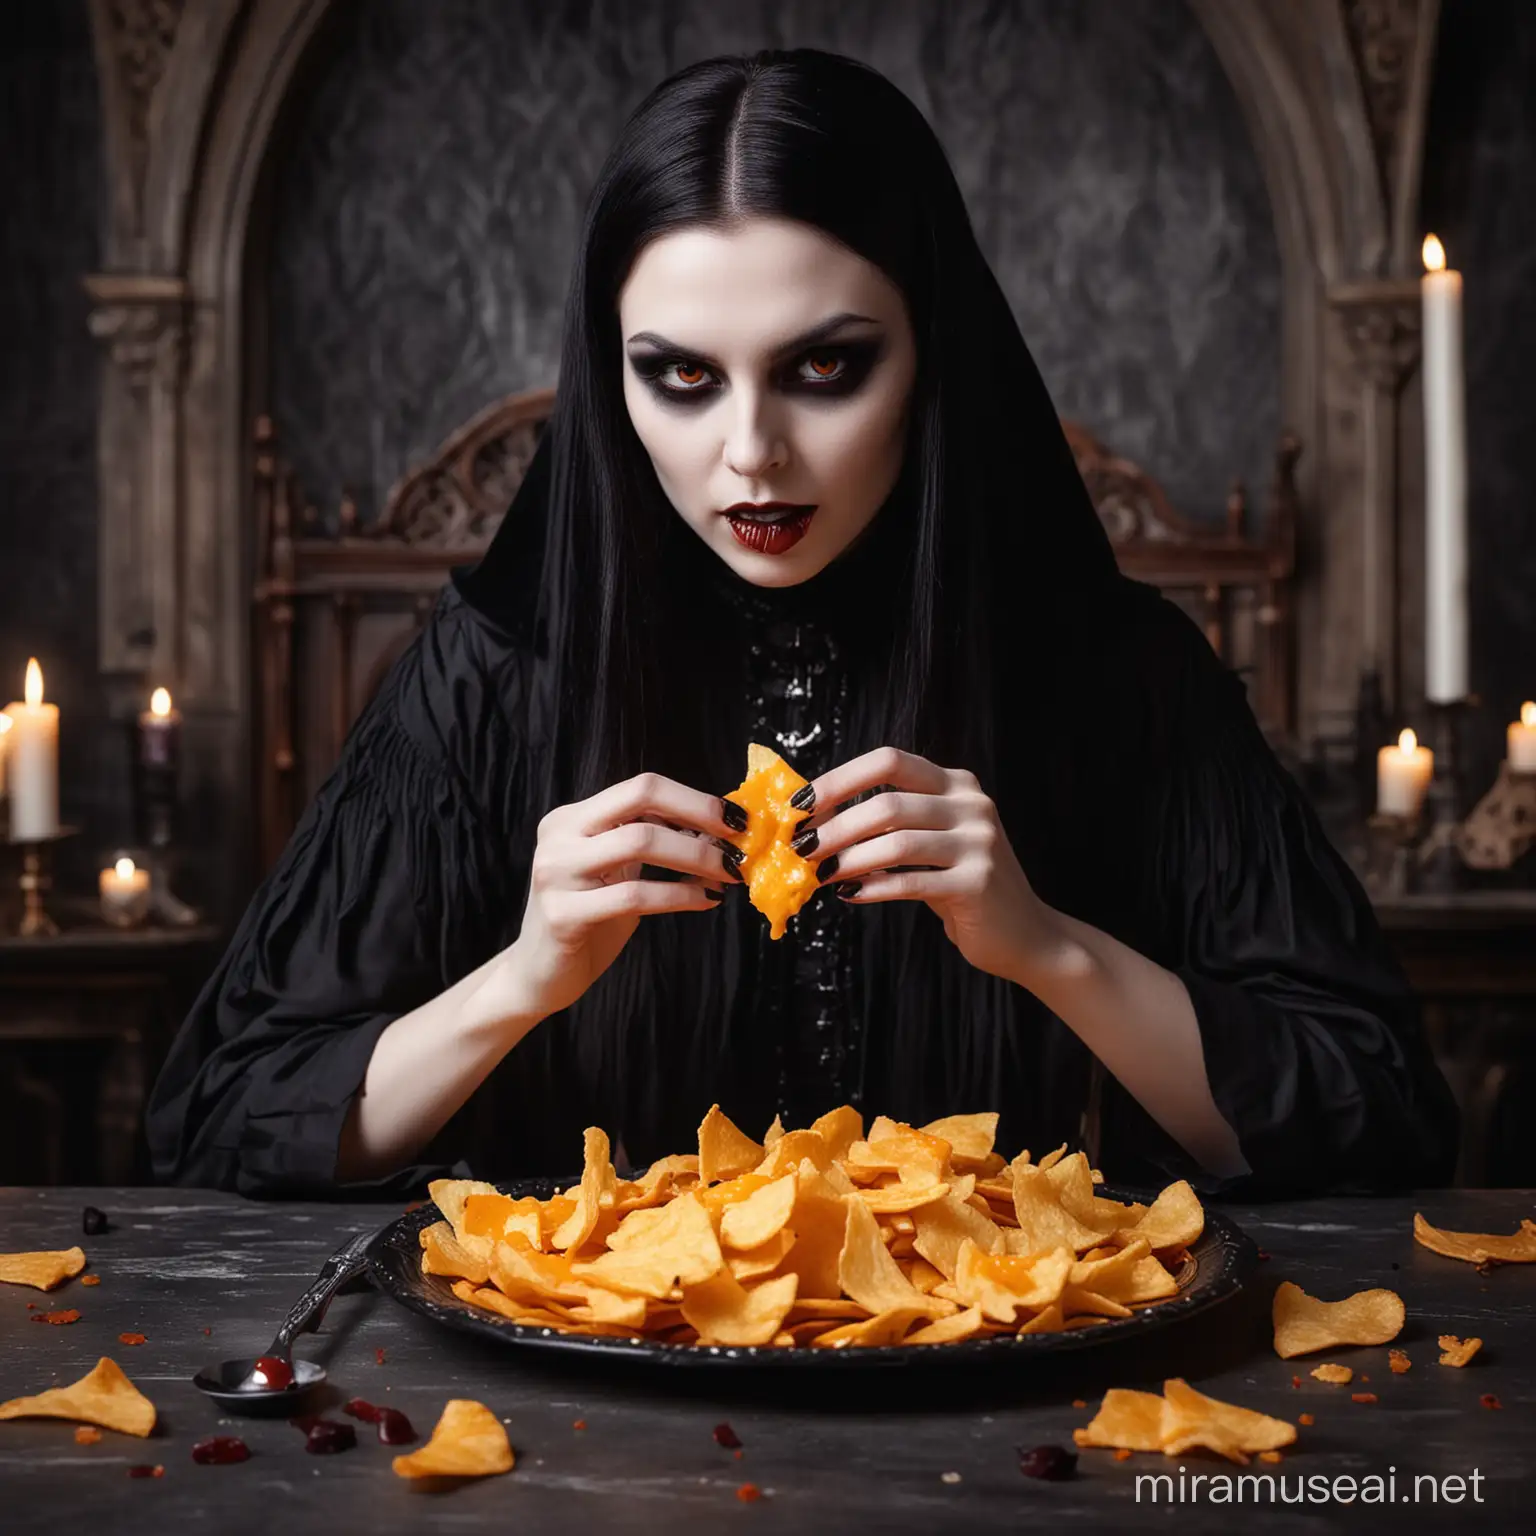 A vampire eating orange cheese colored crispy chips, gothic setting.